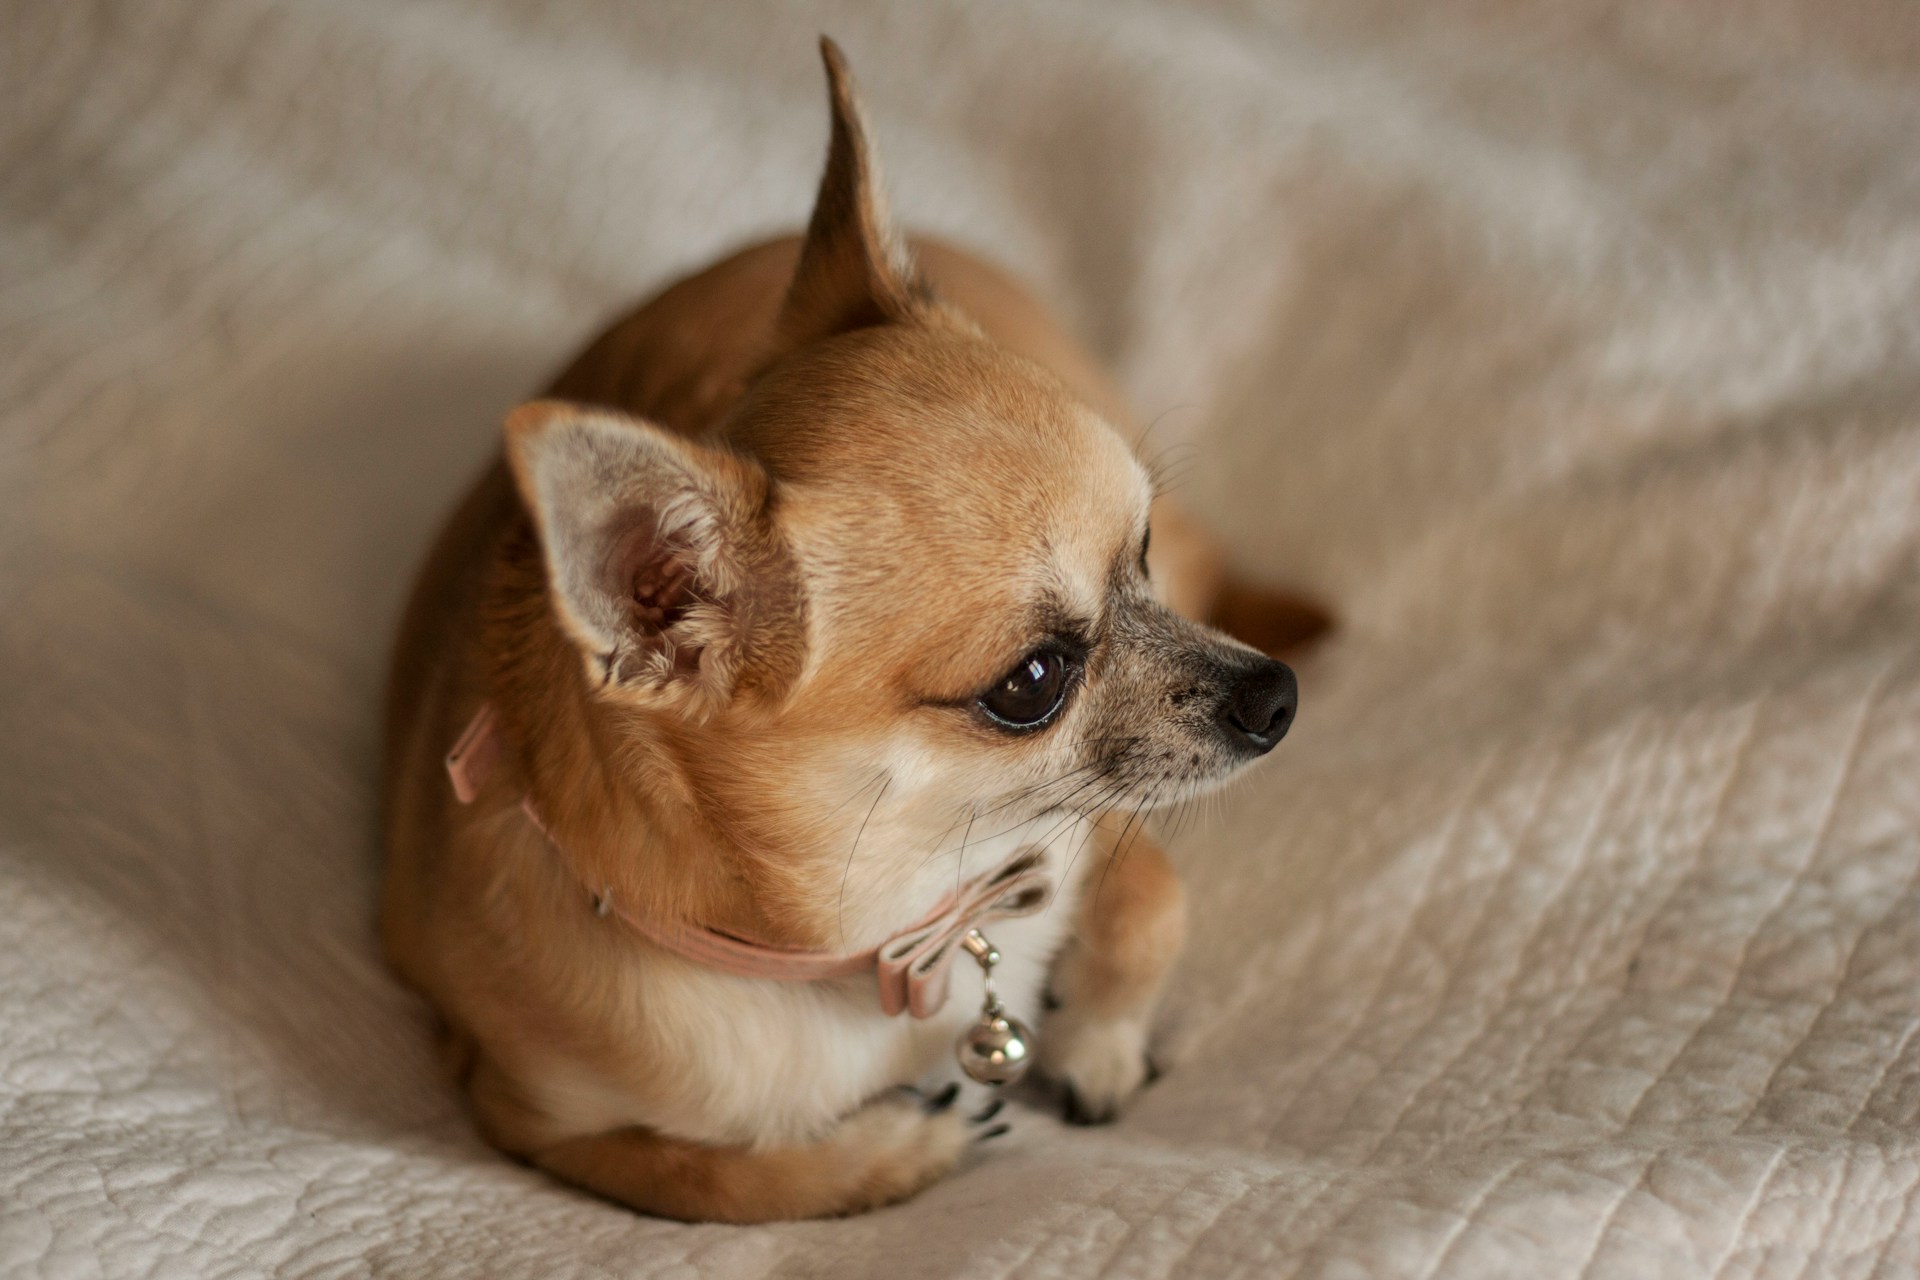 Conchita the chihuahua inherited $3 million when her owner, Miami heiress Gail Posner, died in 2010